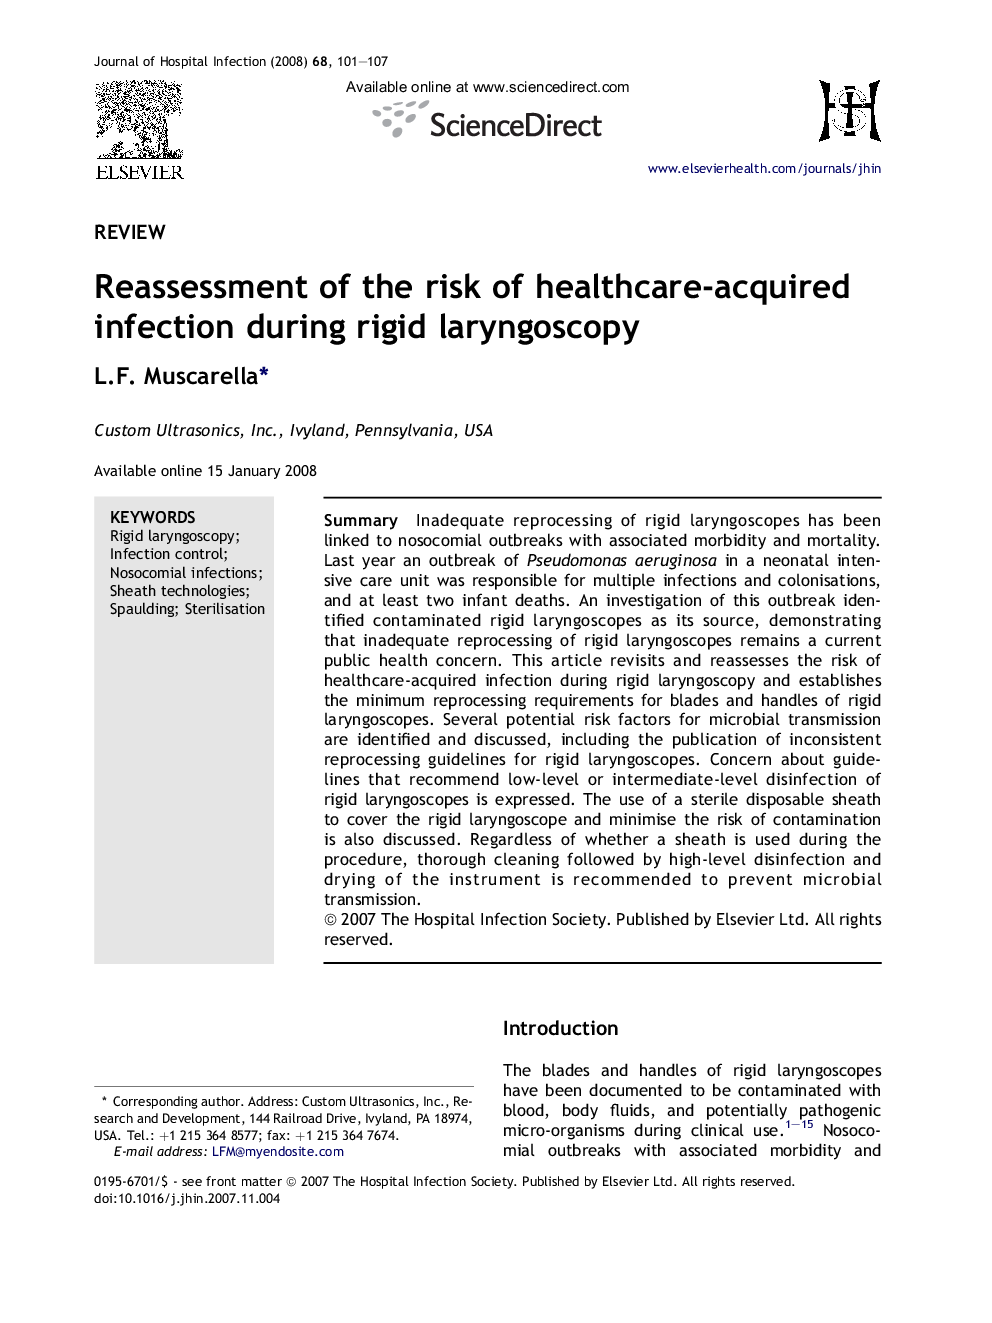 Reassessment of the risk of healthcare-acquired infection during rigid laryngoscopy